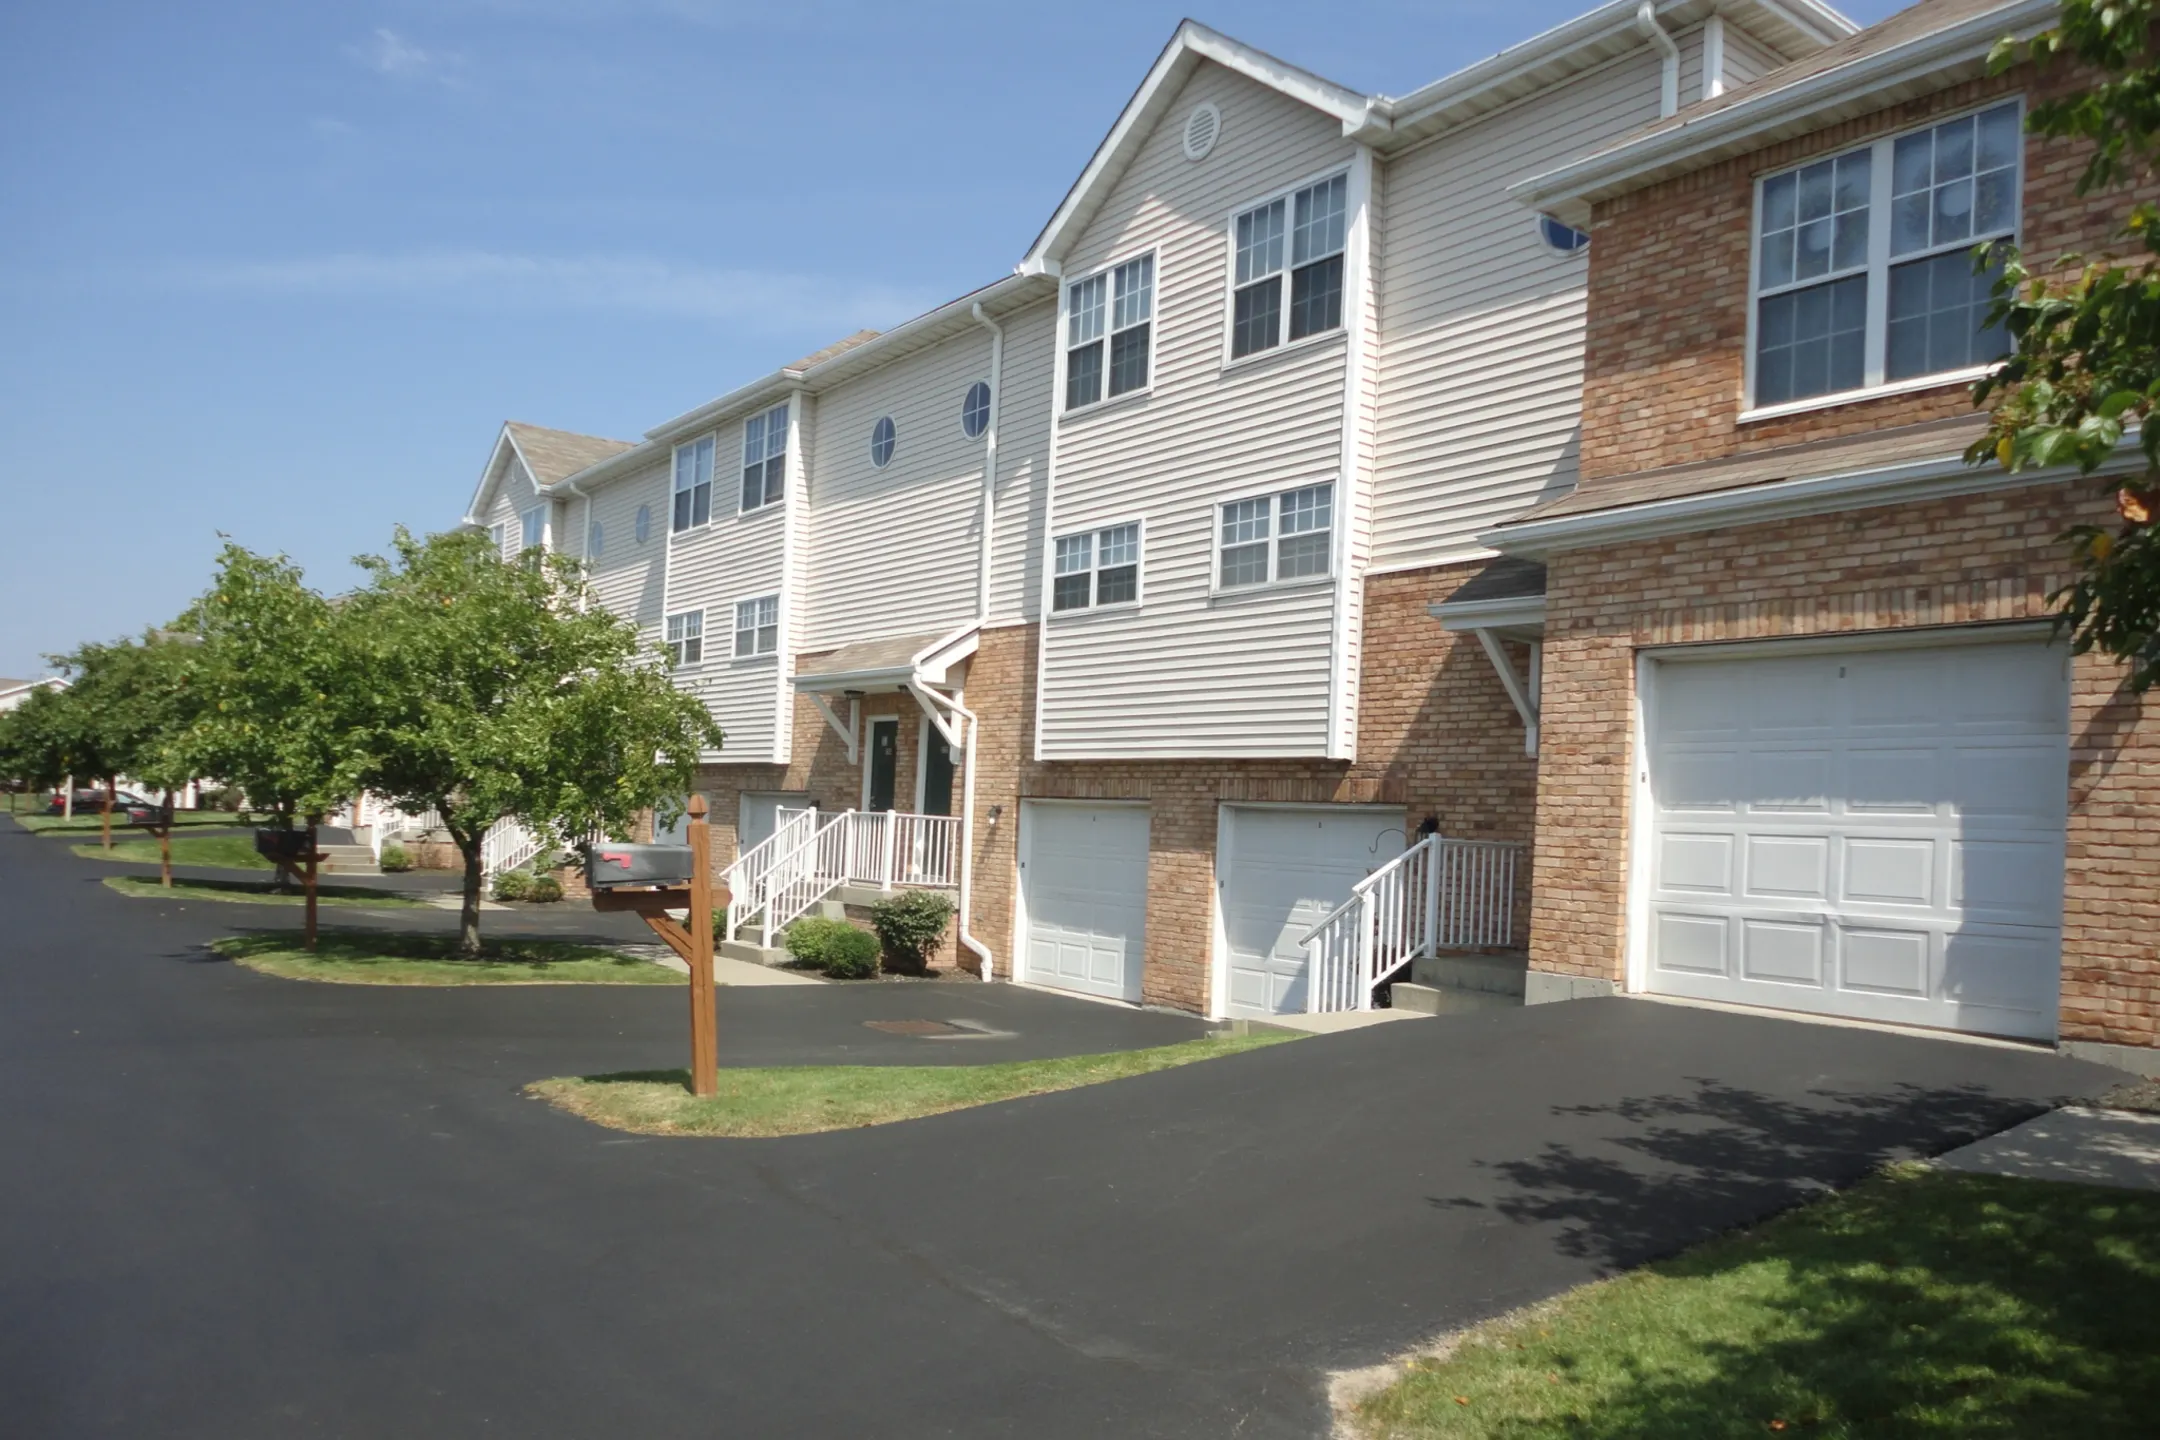 Building - Windsong Place Apartments - Williamsville, NY